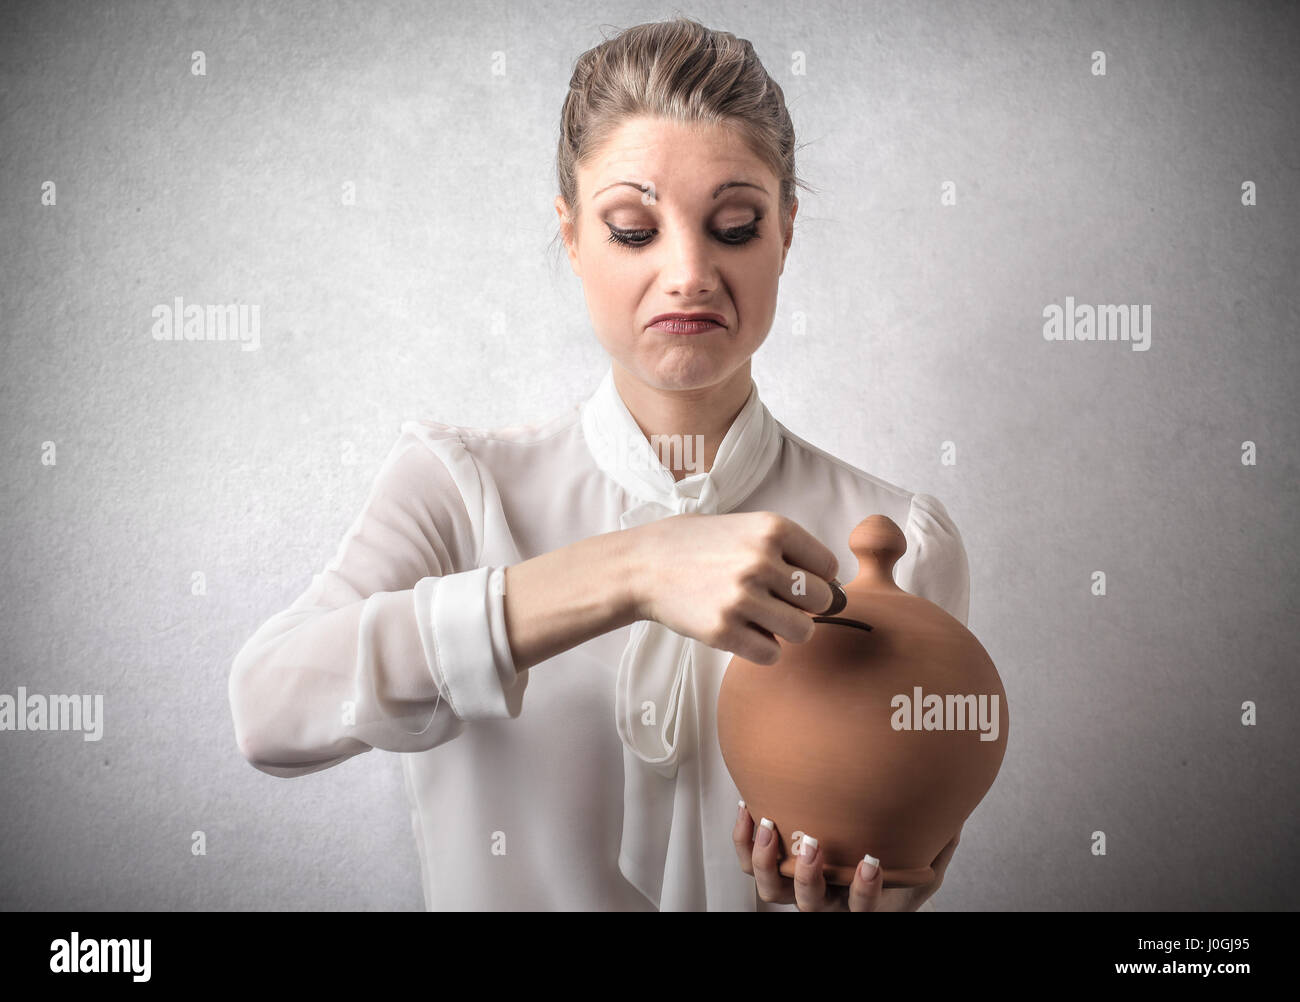 Blond woman with piggy bank Stock Photo